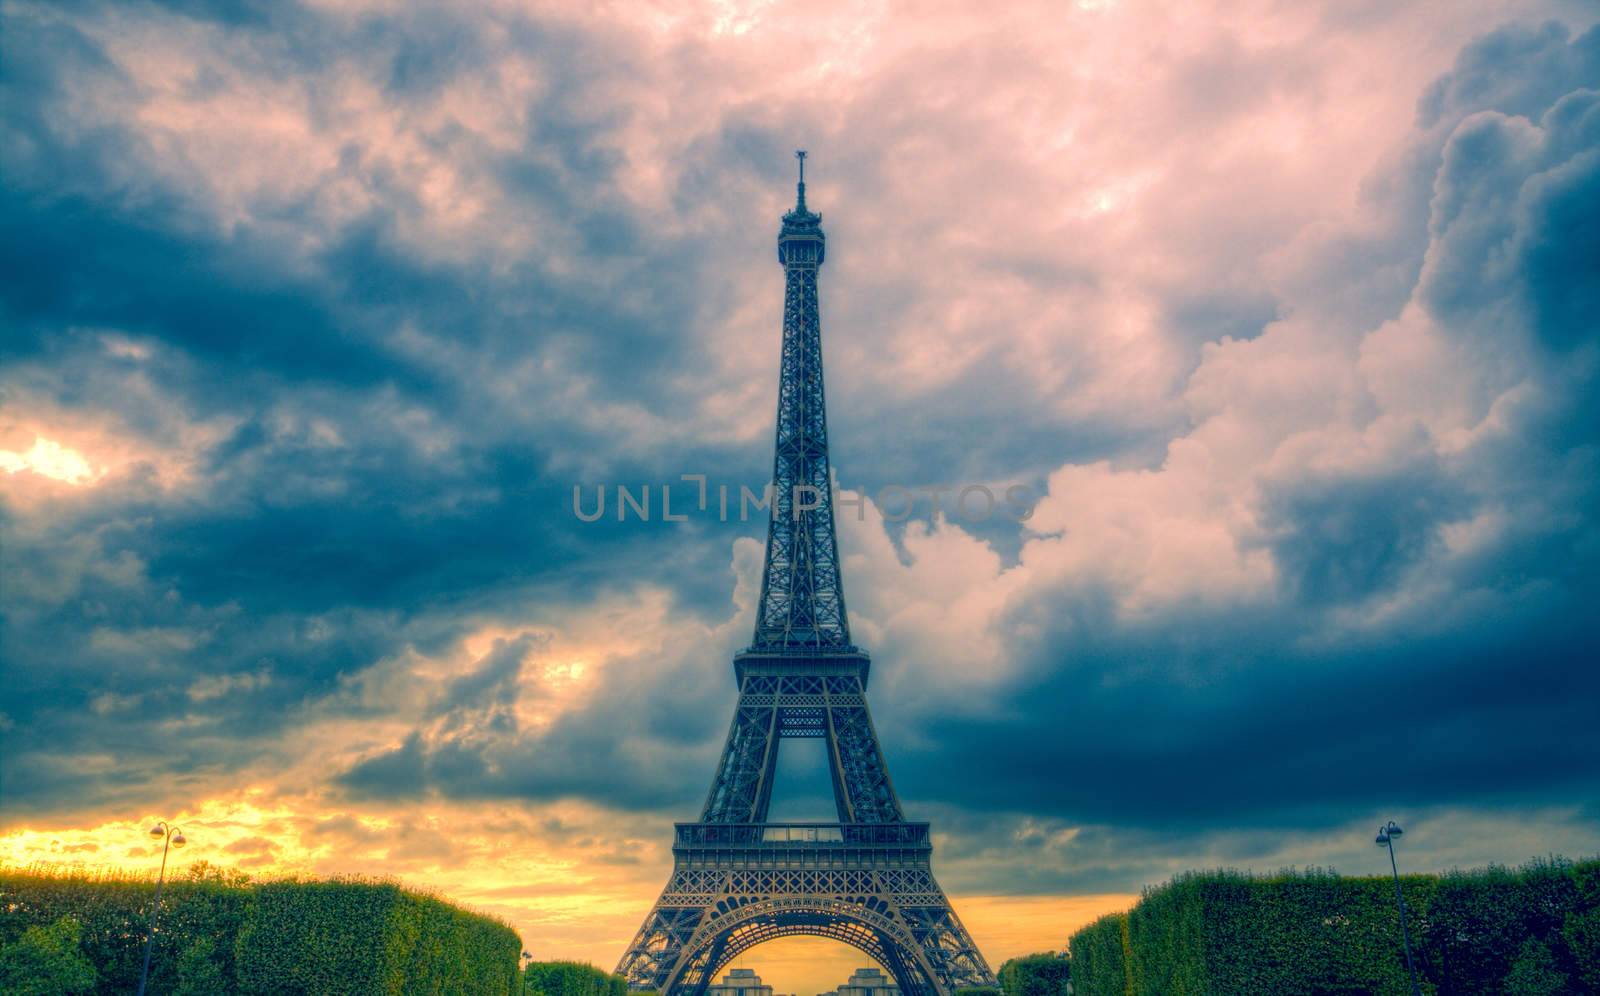 Eiffel tower and clouds by Harvepino